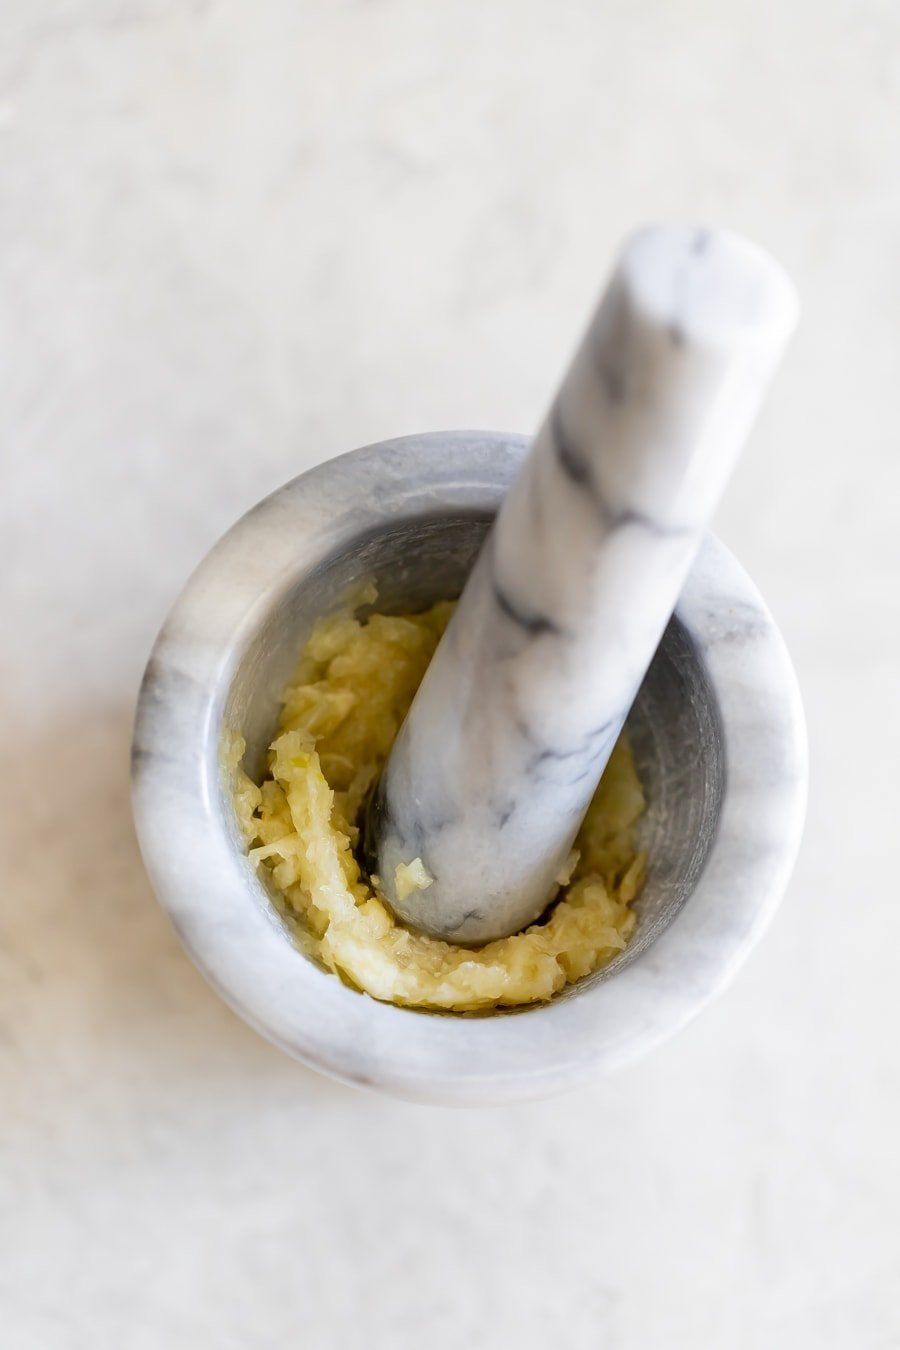 garlic paste in a mortar and pestle